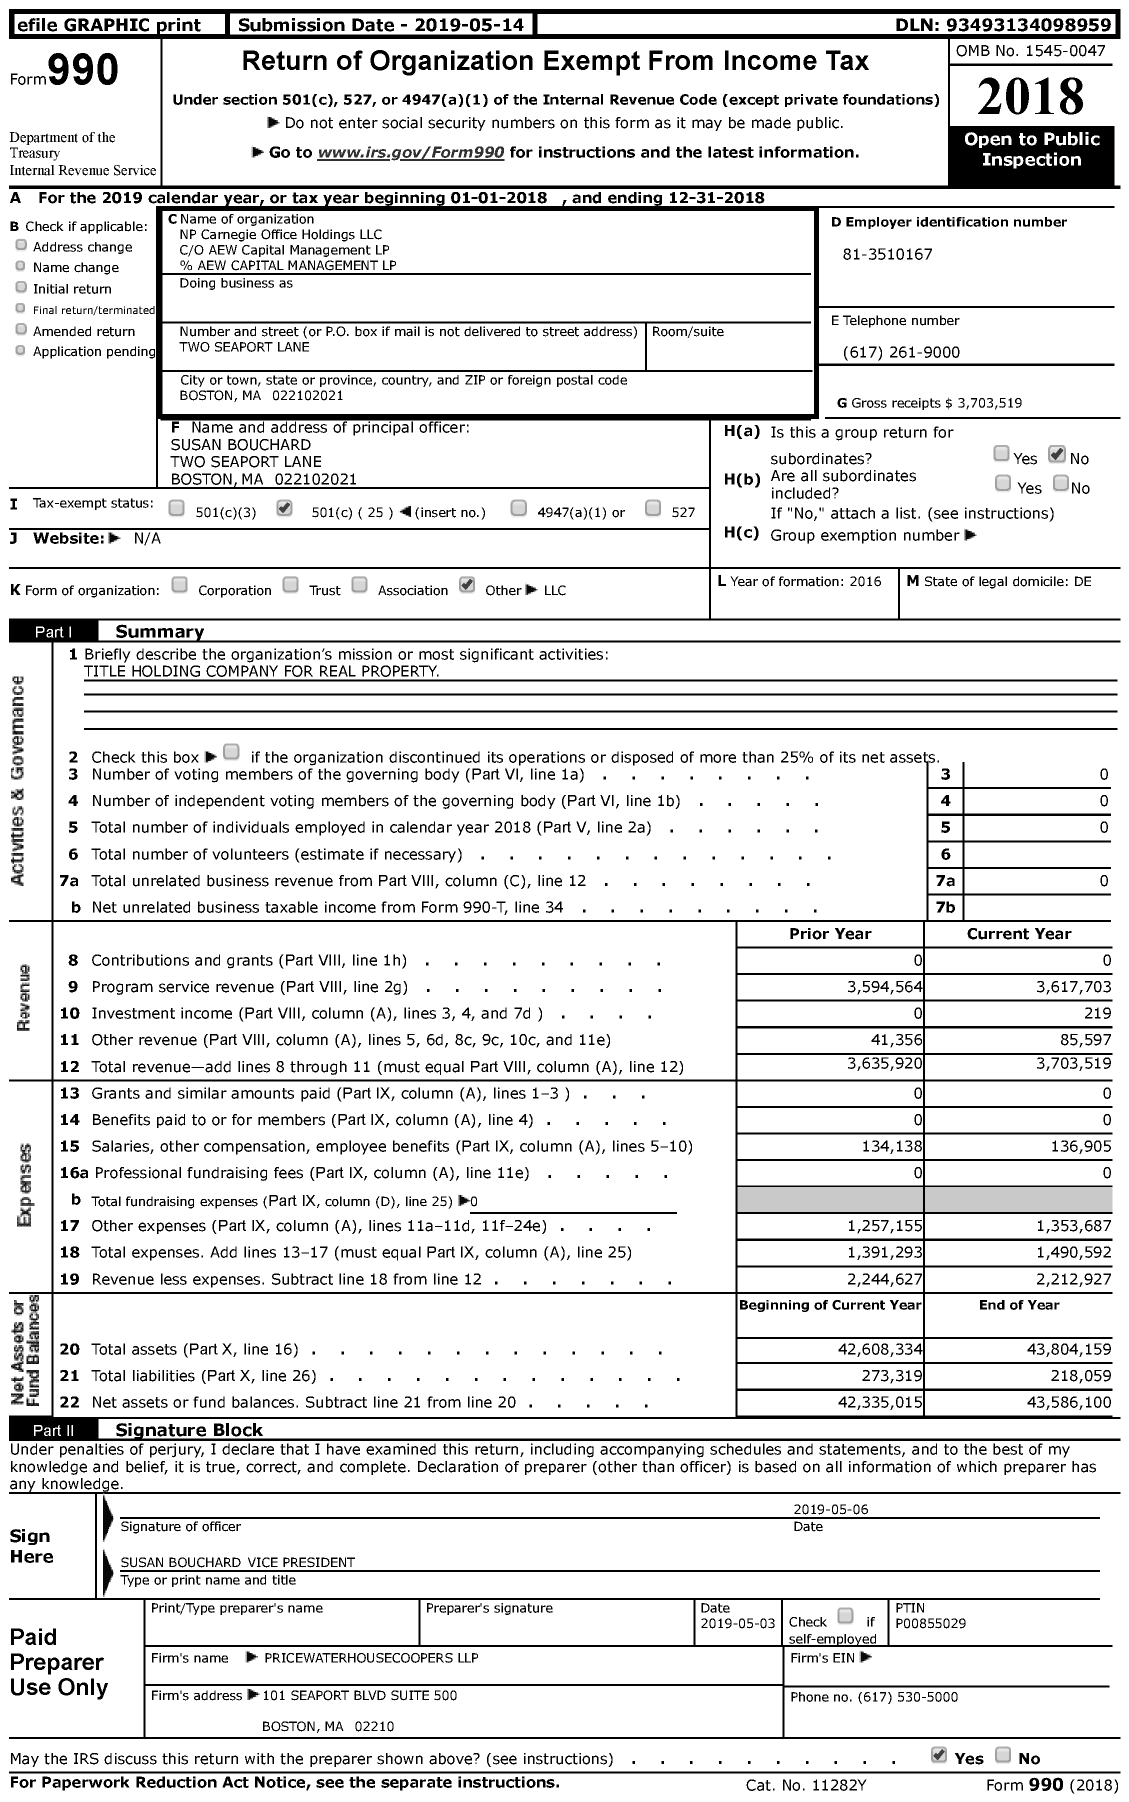 Image of first page of 2018 Form 990 for NP Carnegie Office Holdings LLC